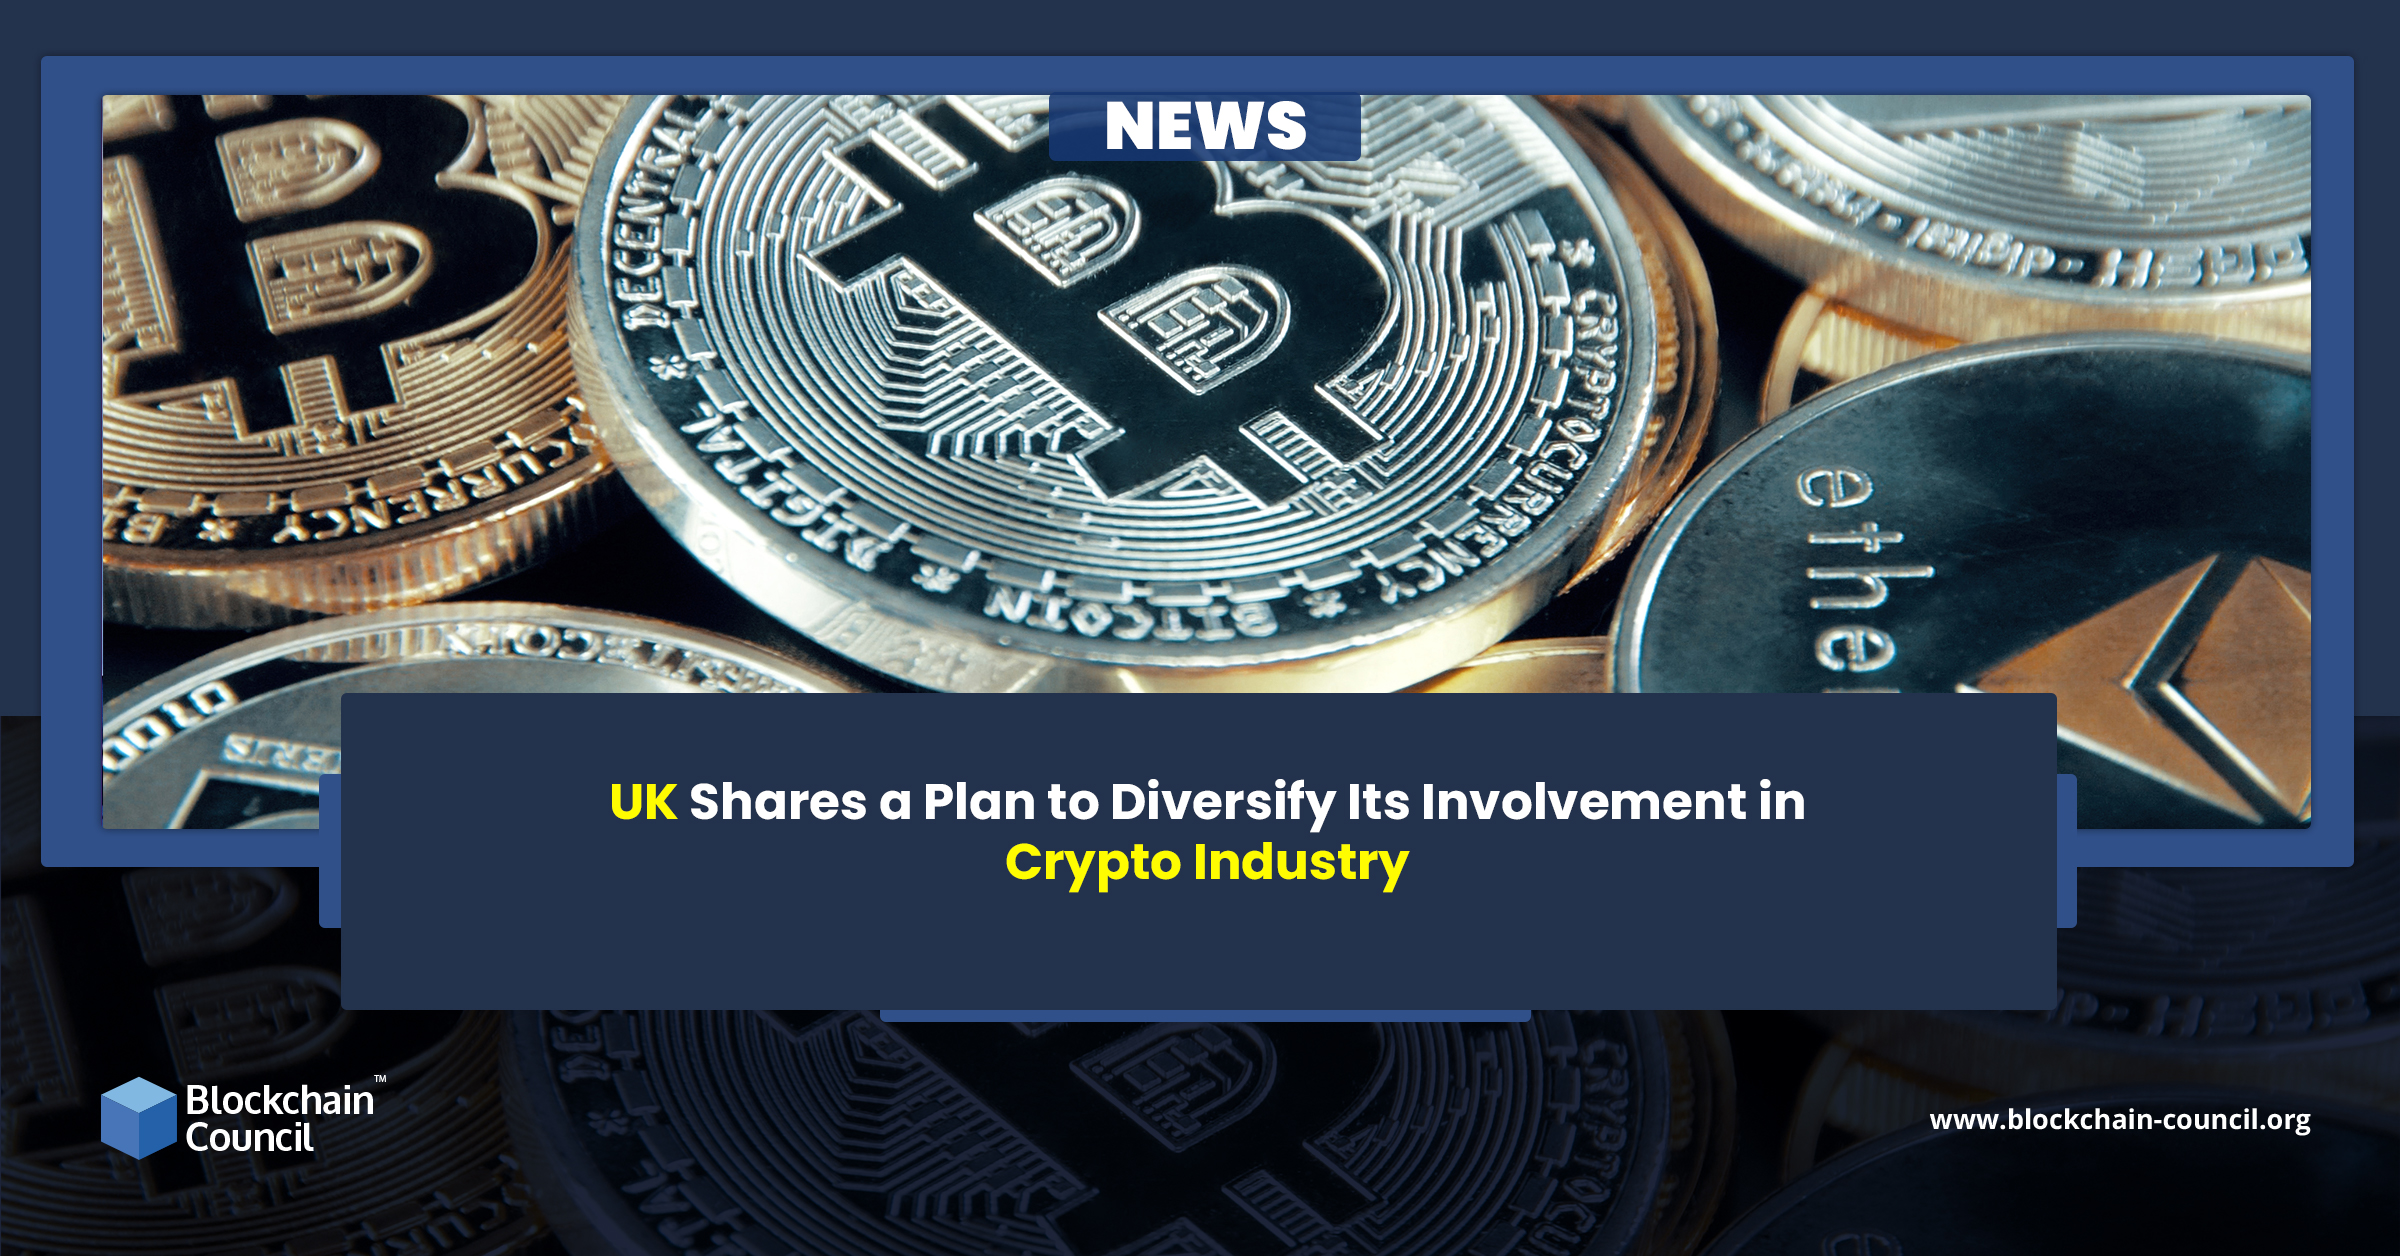 UK Shares a Plan to Diversify Its Involvement in Crypto Industry